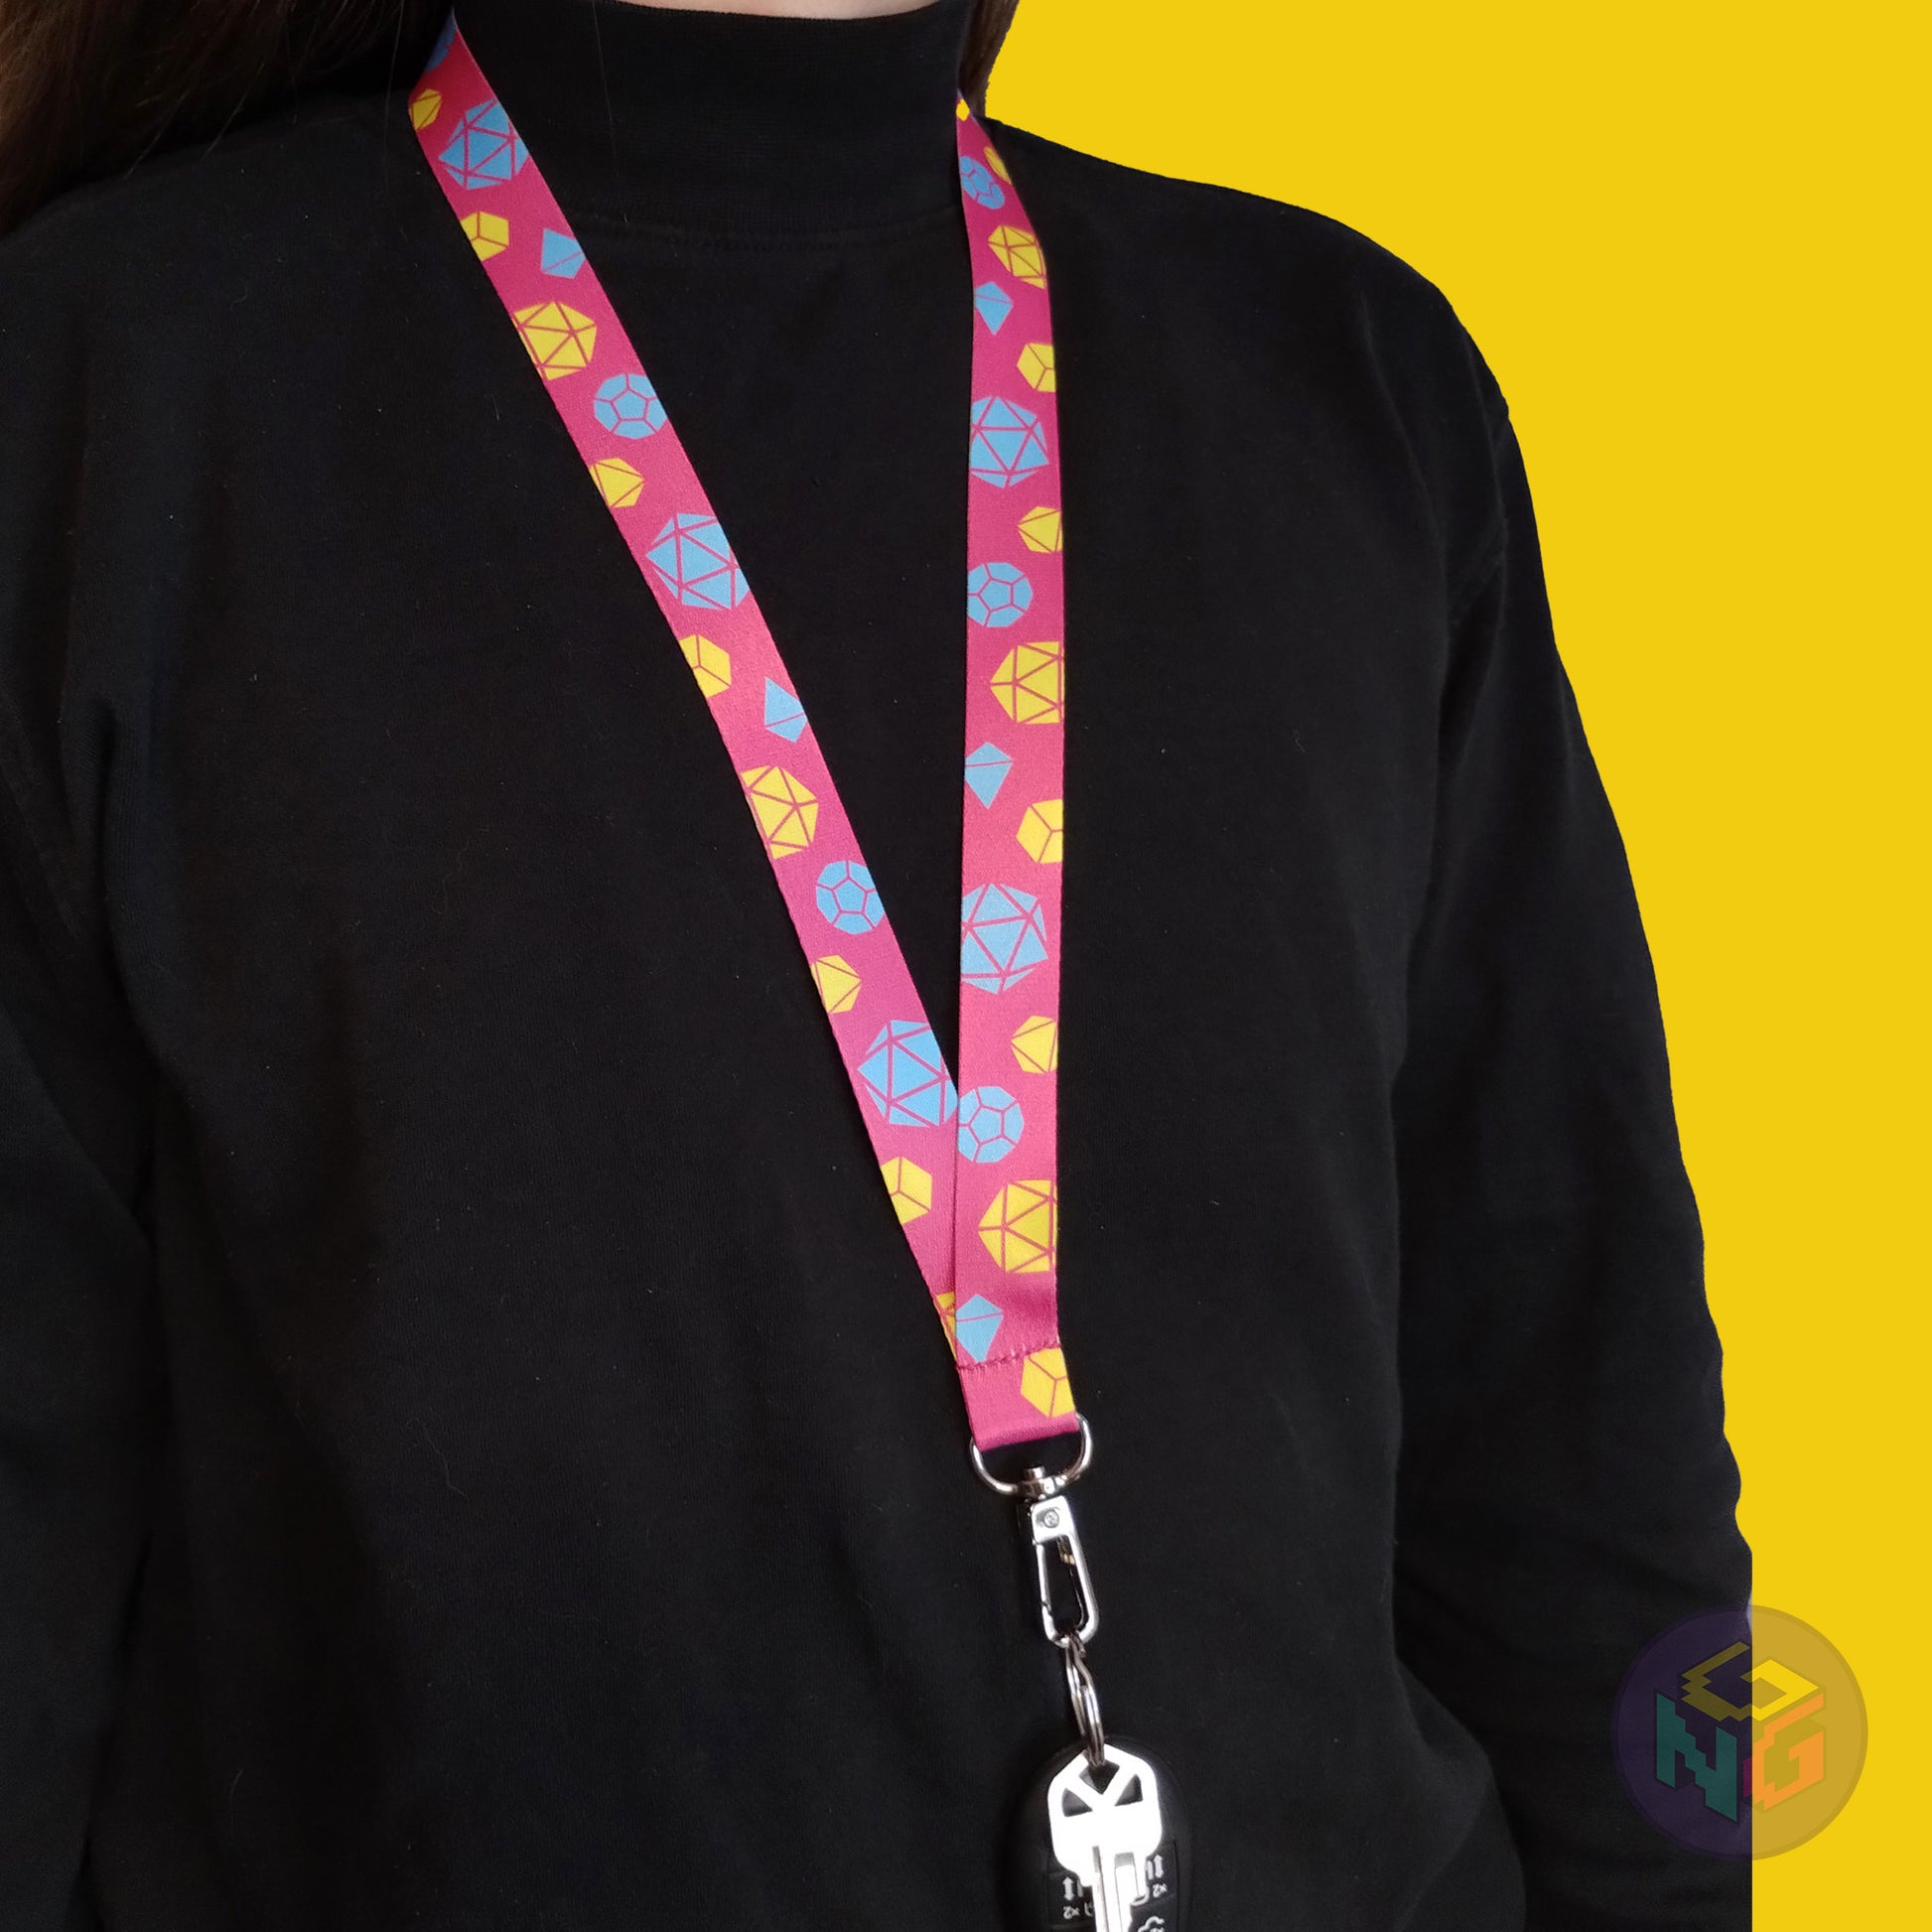 pink pansexual pride lanyard being worn by a flat chested person wearing a black turtleneck. The end of the lanyard falls between their sternum and bellybutton and has a key fob clipped to the end